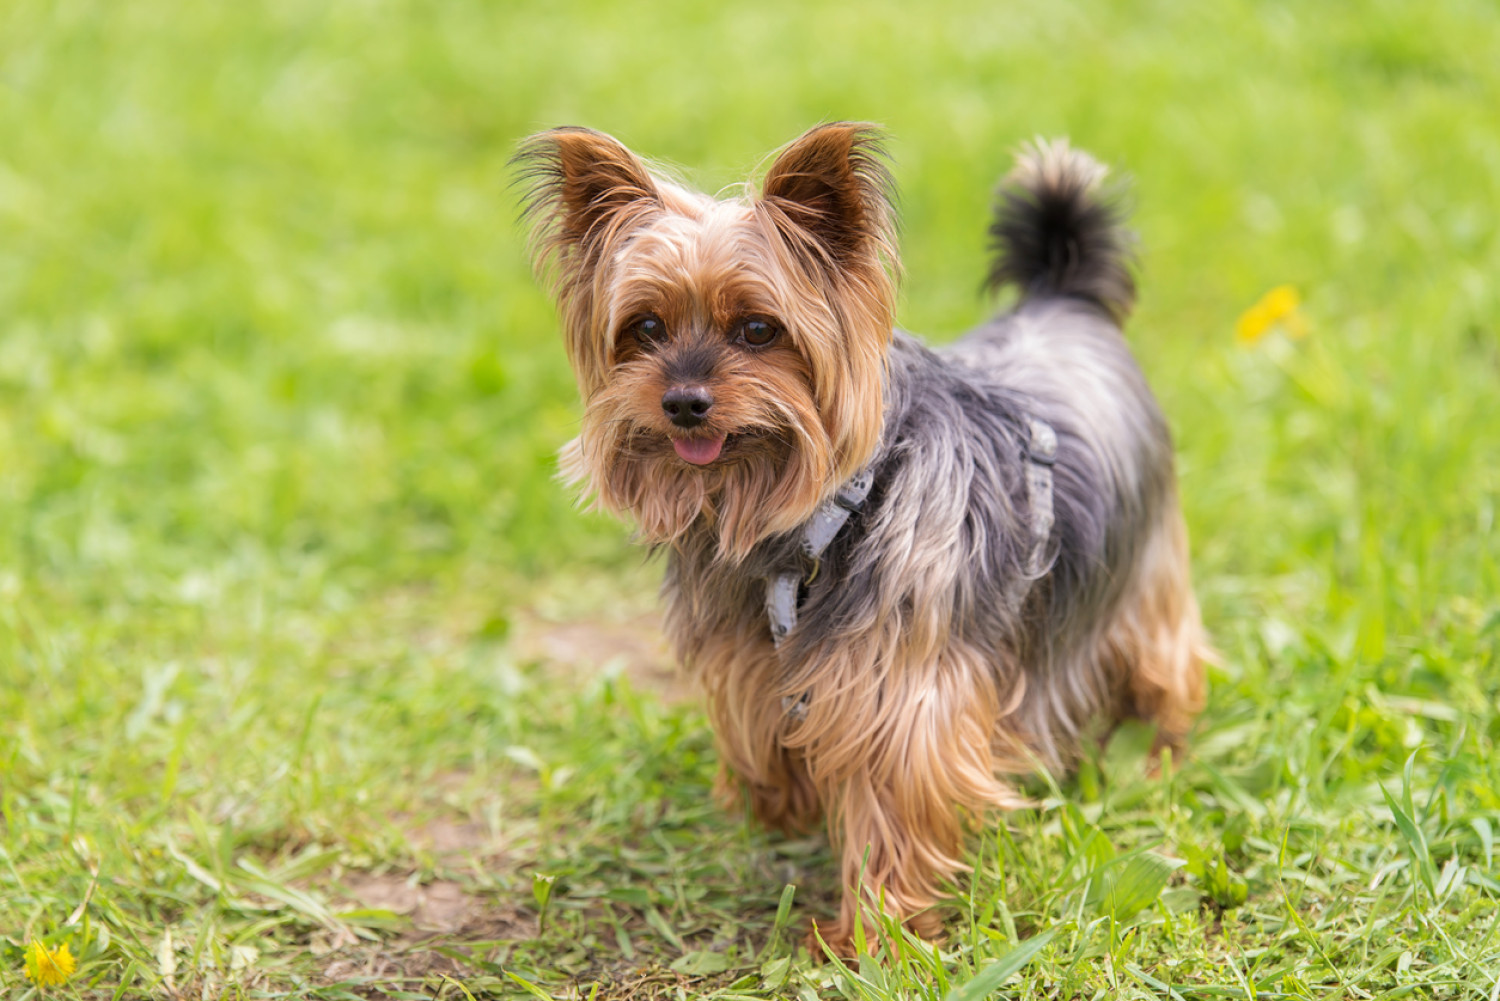 Yorkshire Terrier for pet therapy - Focus Care